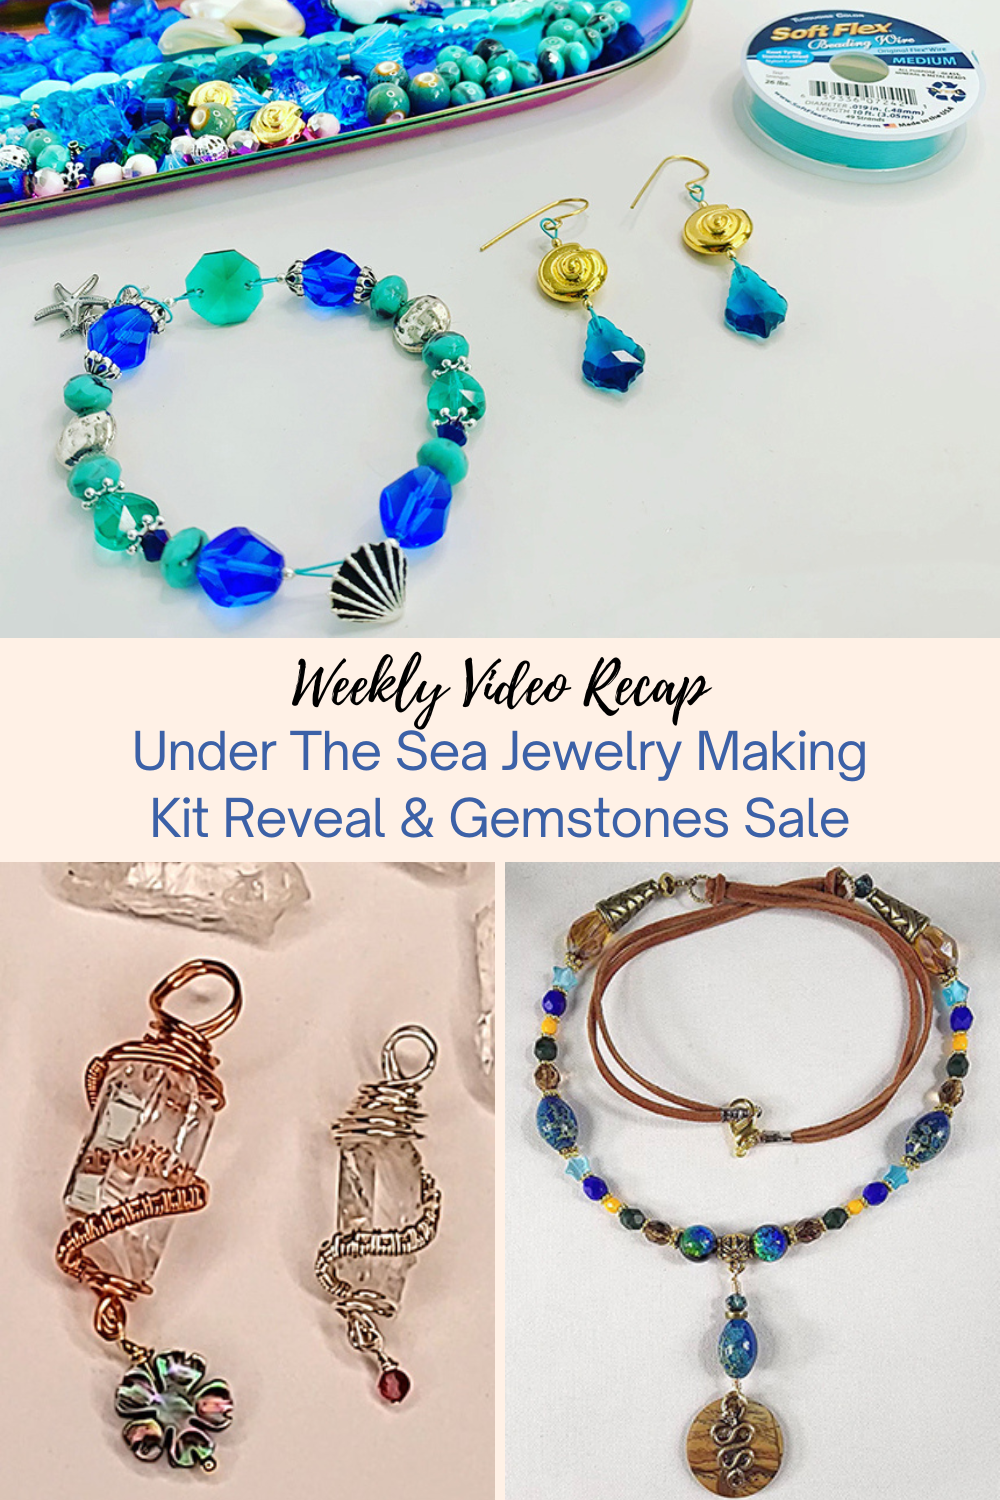 Under The Sea Jewelry Making Kit Reveal & Gemstones Sale Collage